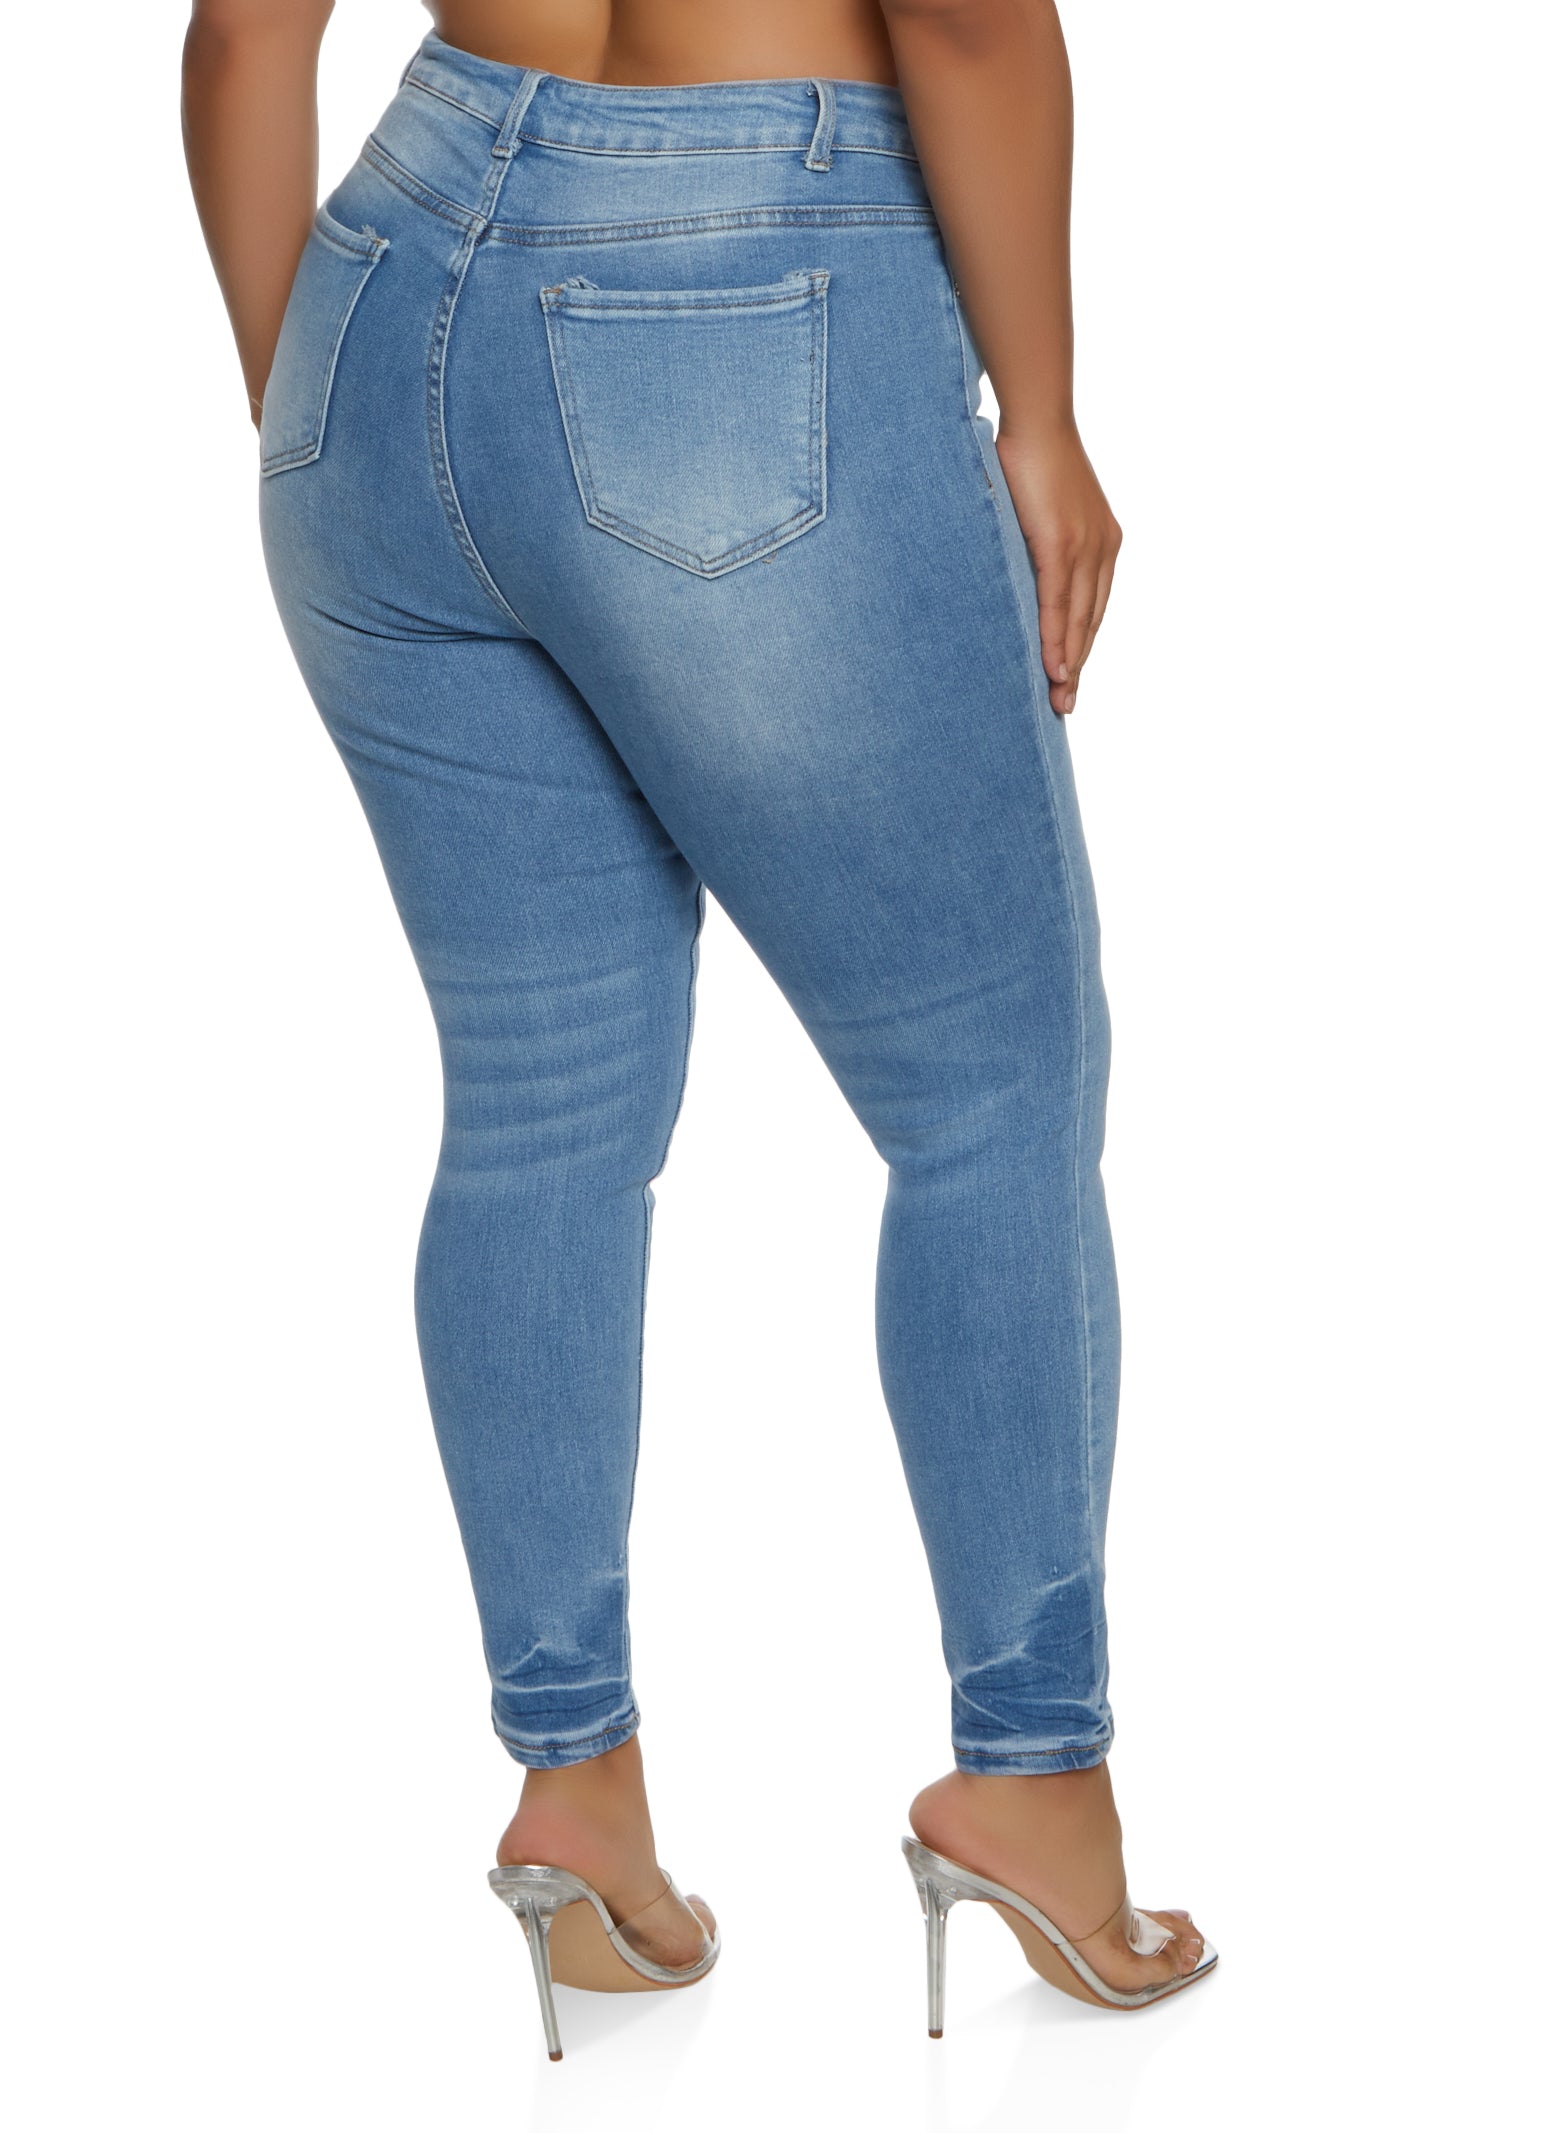 Plus Size WAX Distressed Rolled Cuff Jeans - Light Wash